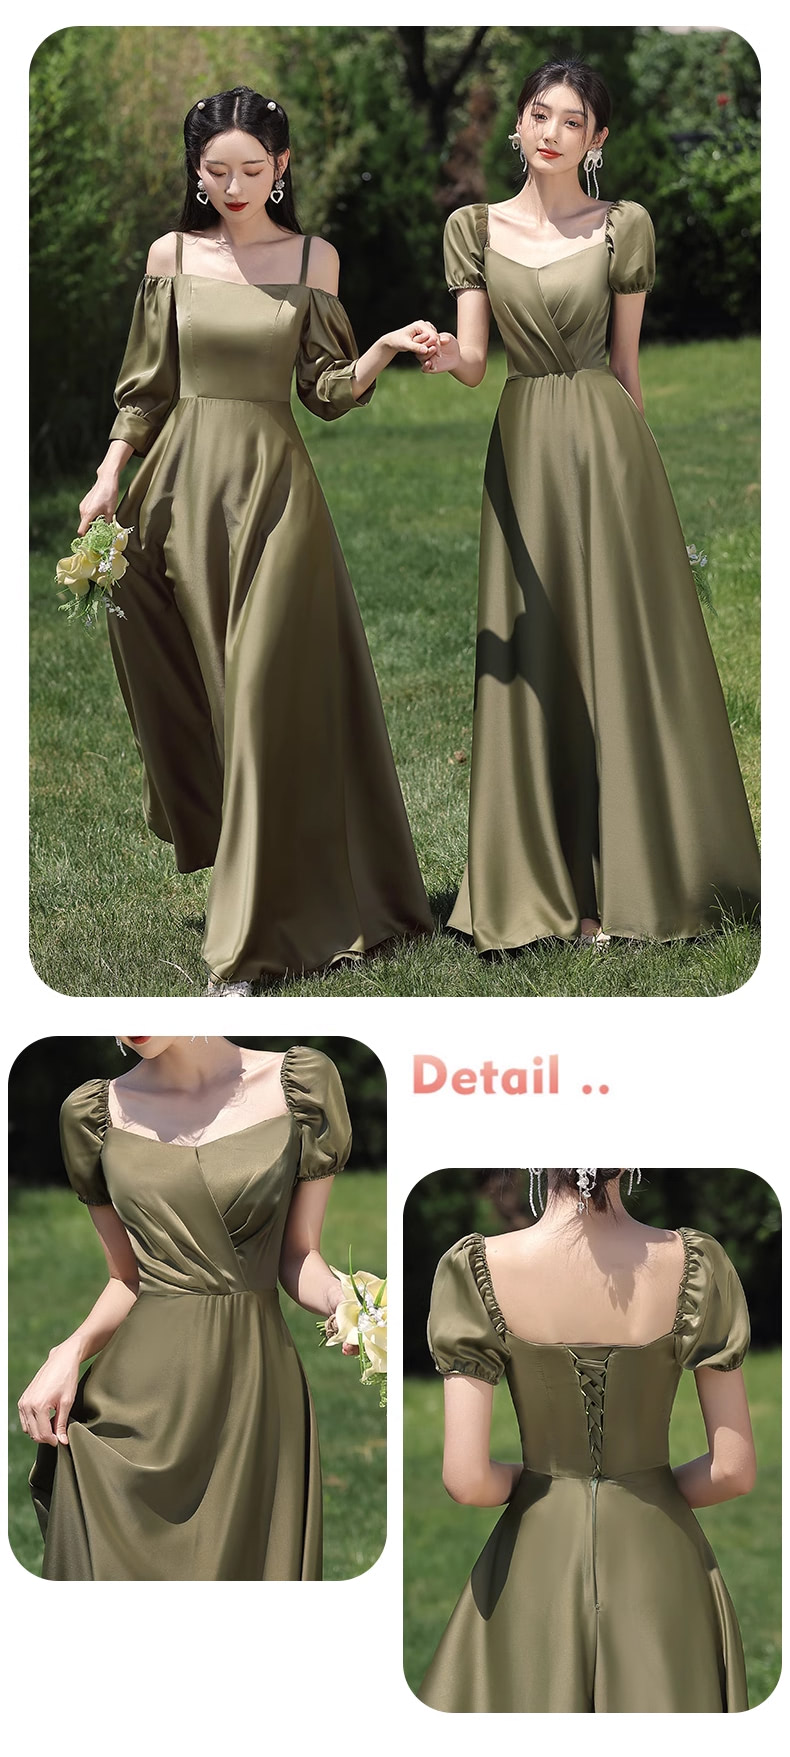 Simple-Green-Satin-Bridesmaid-Dress-Cocktail-Prom-Evening-Gowns15